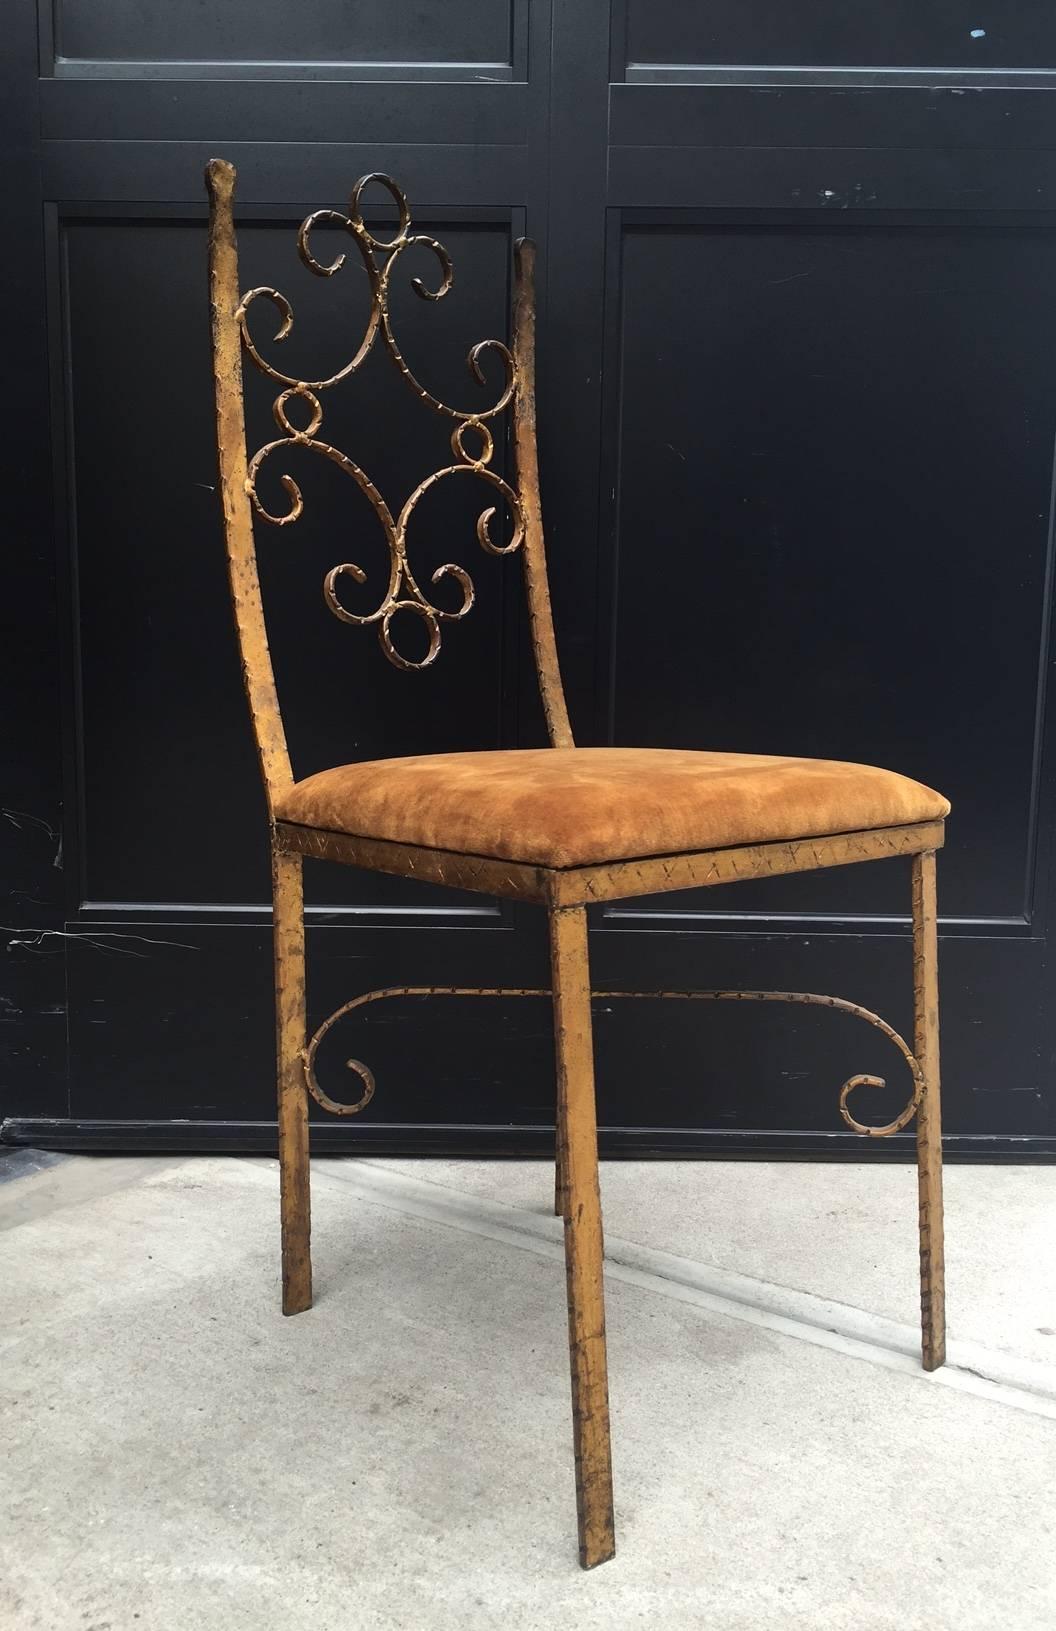 Four French wrought iron gold gilt chairs. Manner of Gilbert Poillerat. Upholstered in brown velvet. Chairs have slightly curved backs.